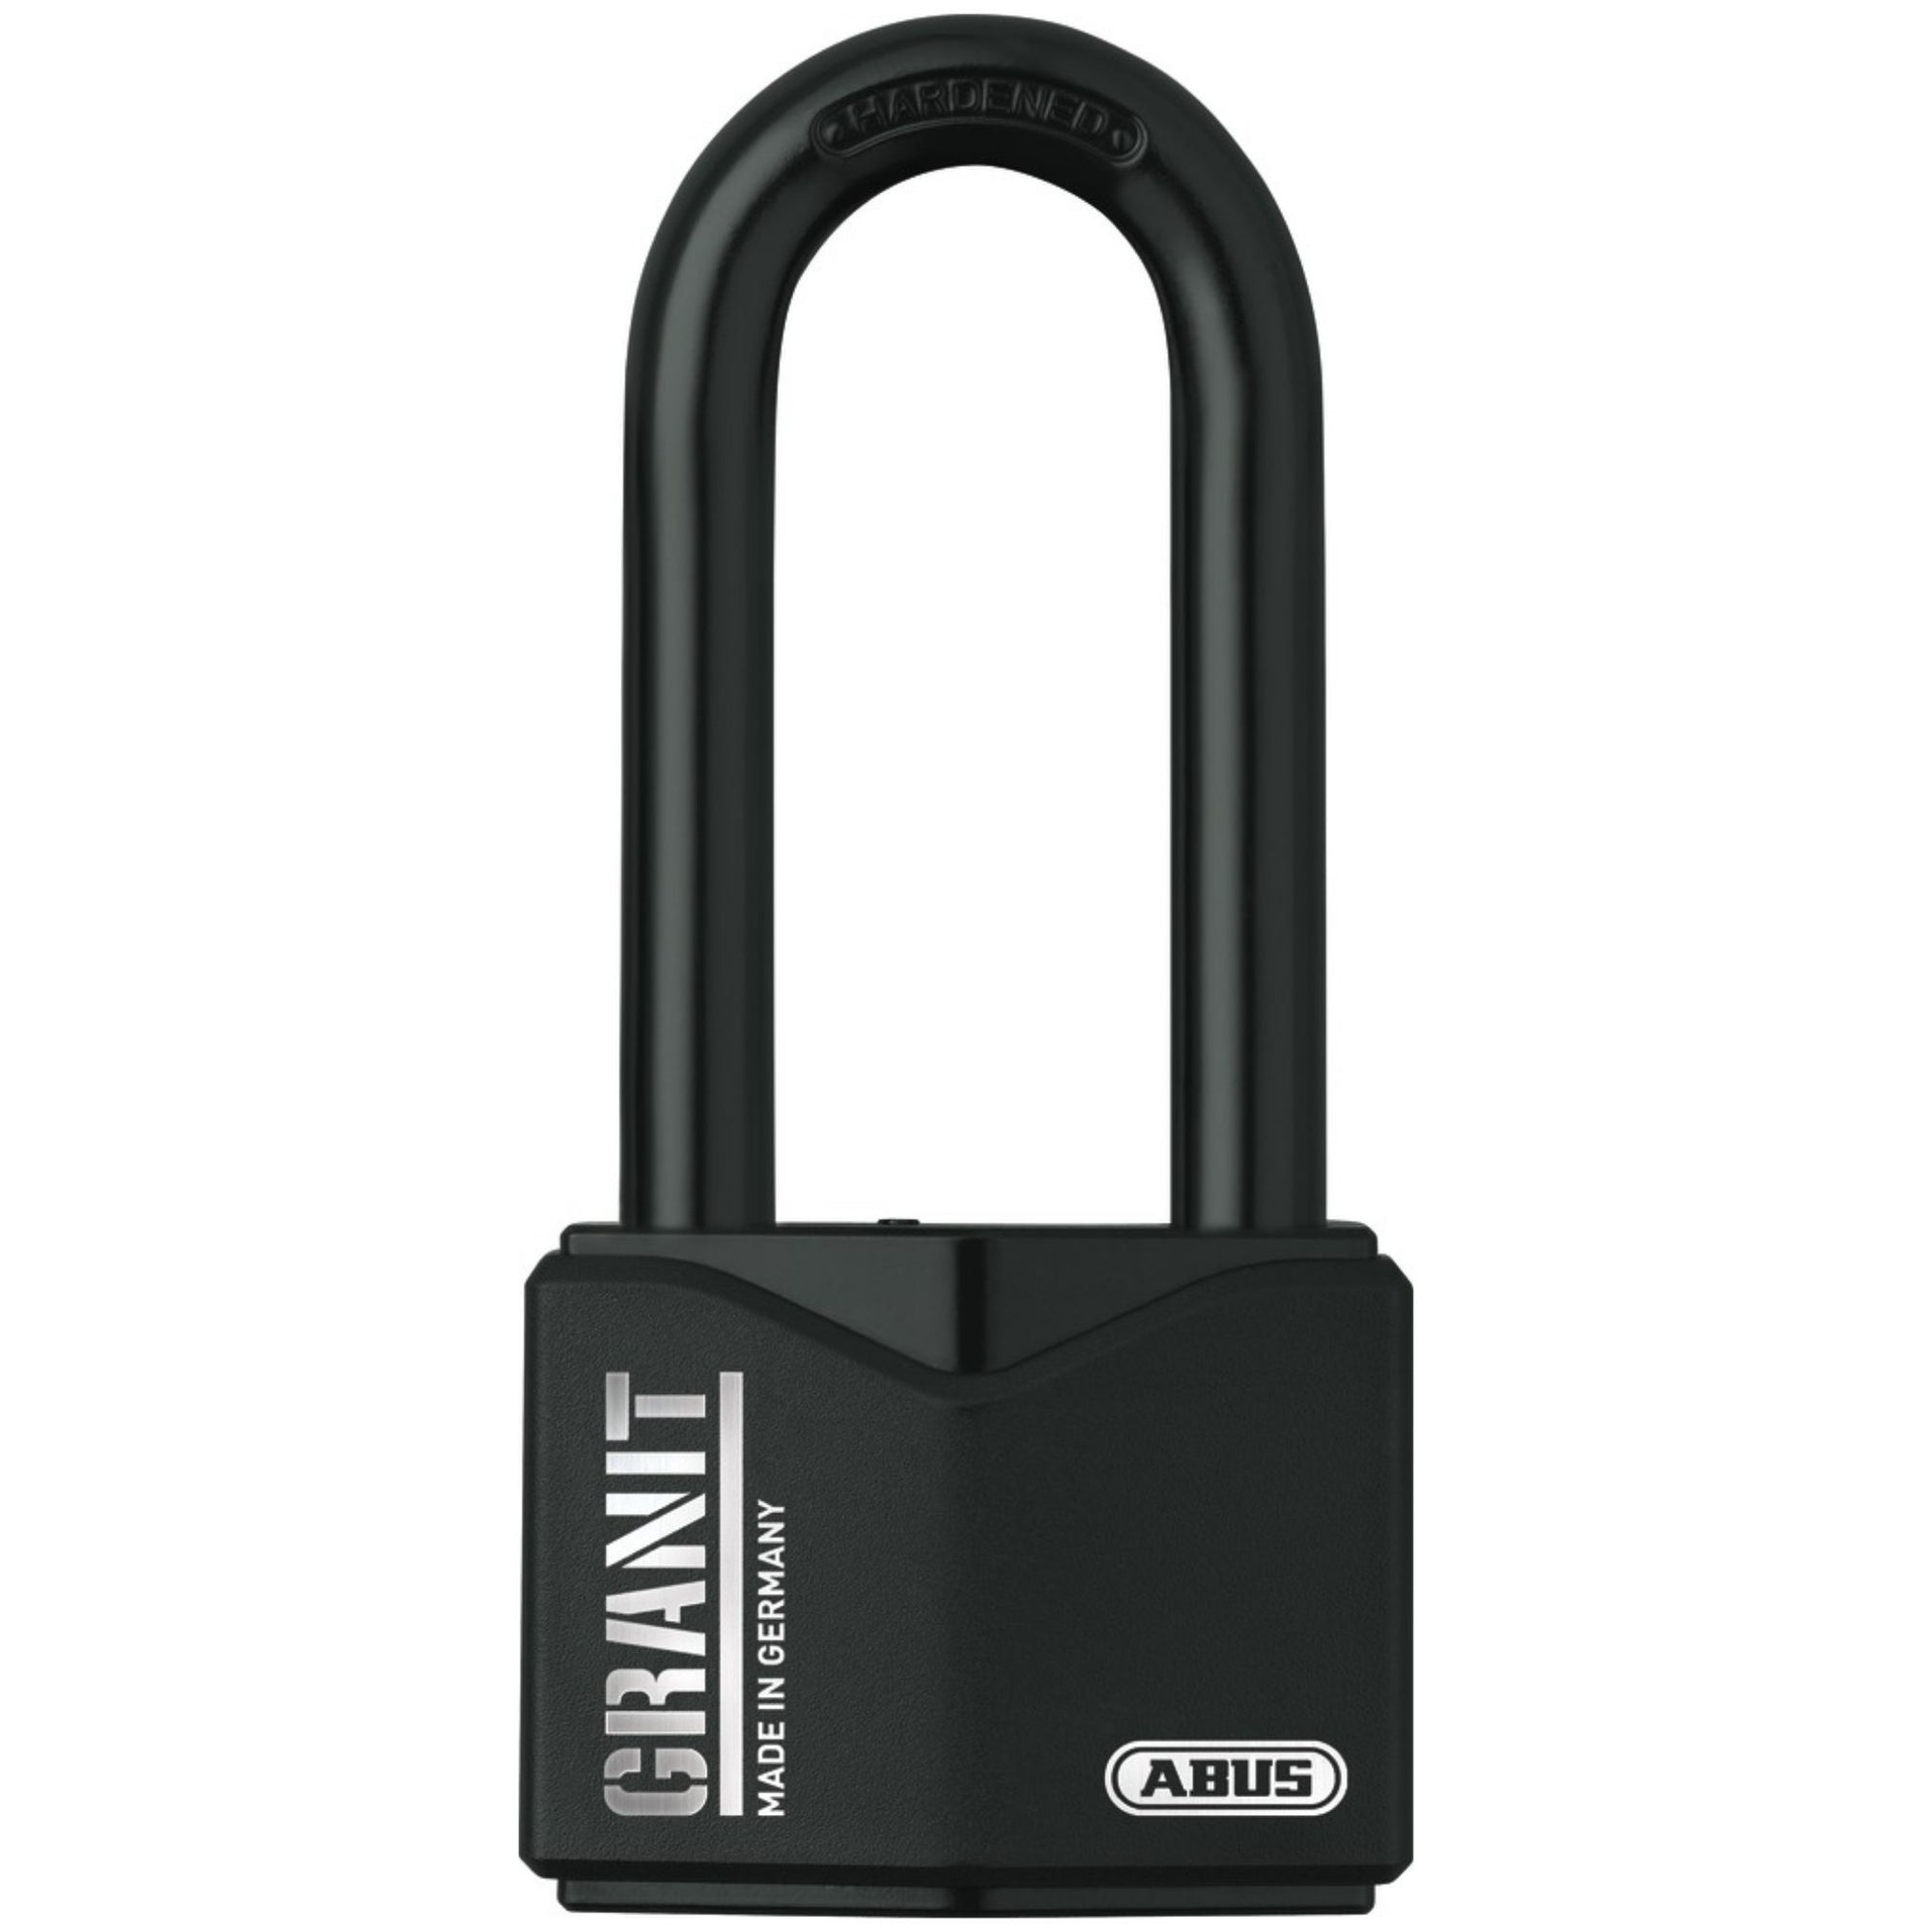 Abus 37/55HB75 KD Granit Padlock with 3-Inch Shackle - The Lock Source